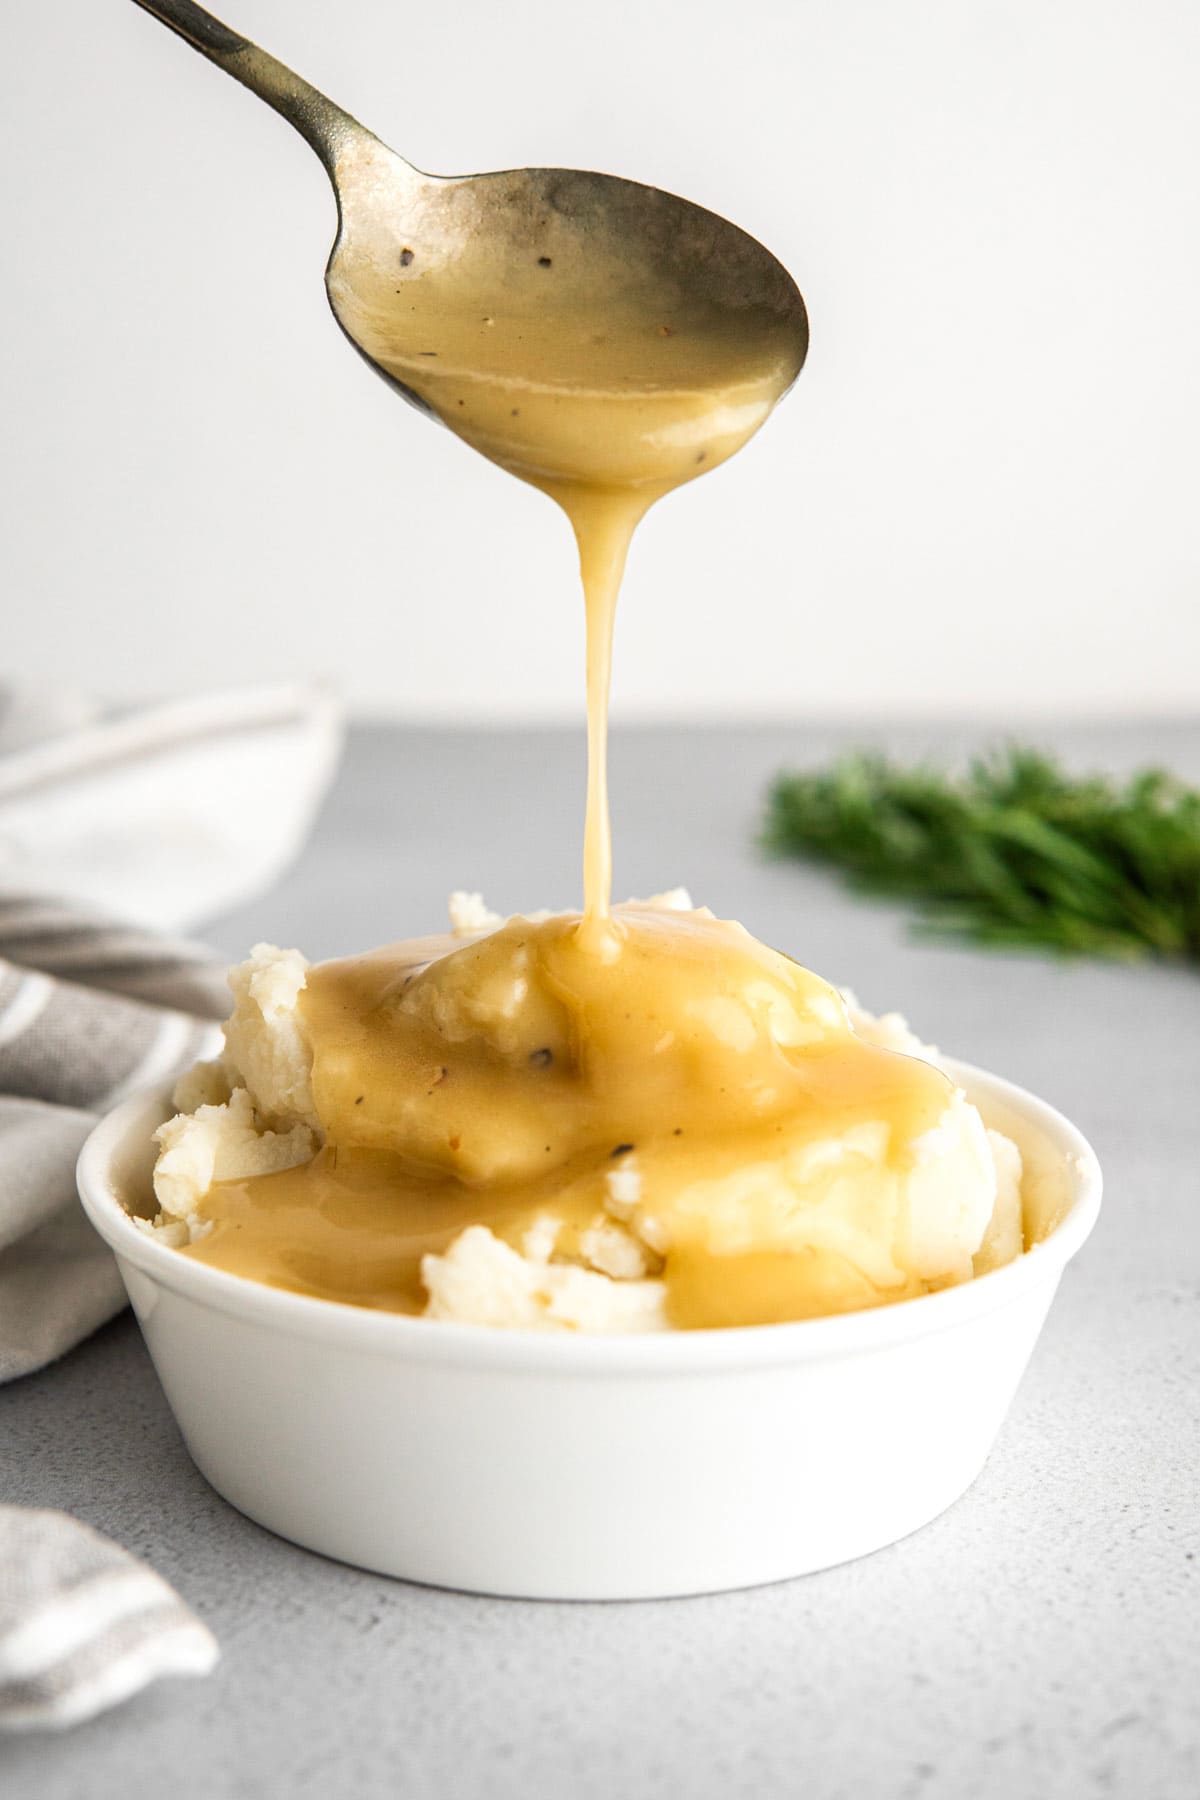 mashed potatoes drizzled with gravy.